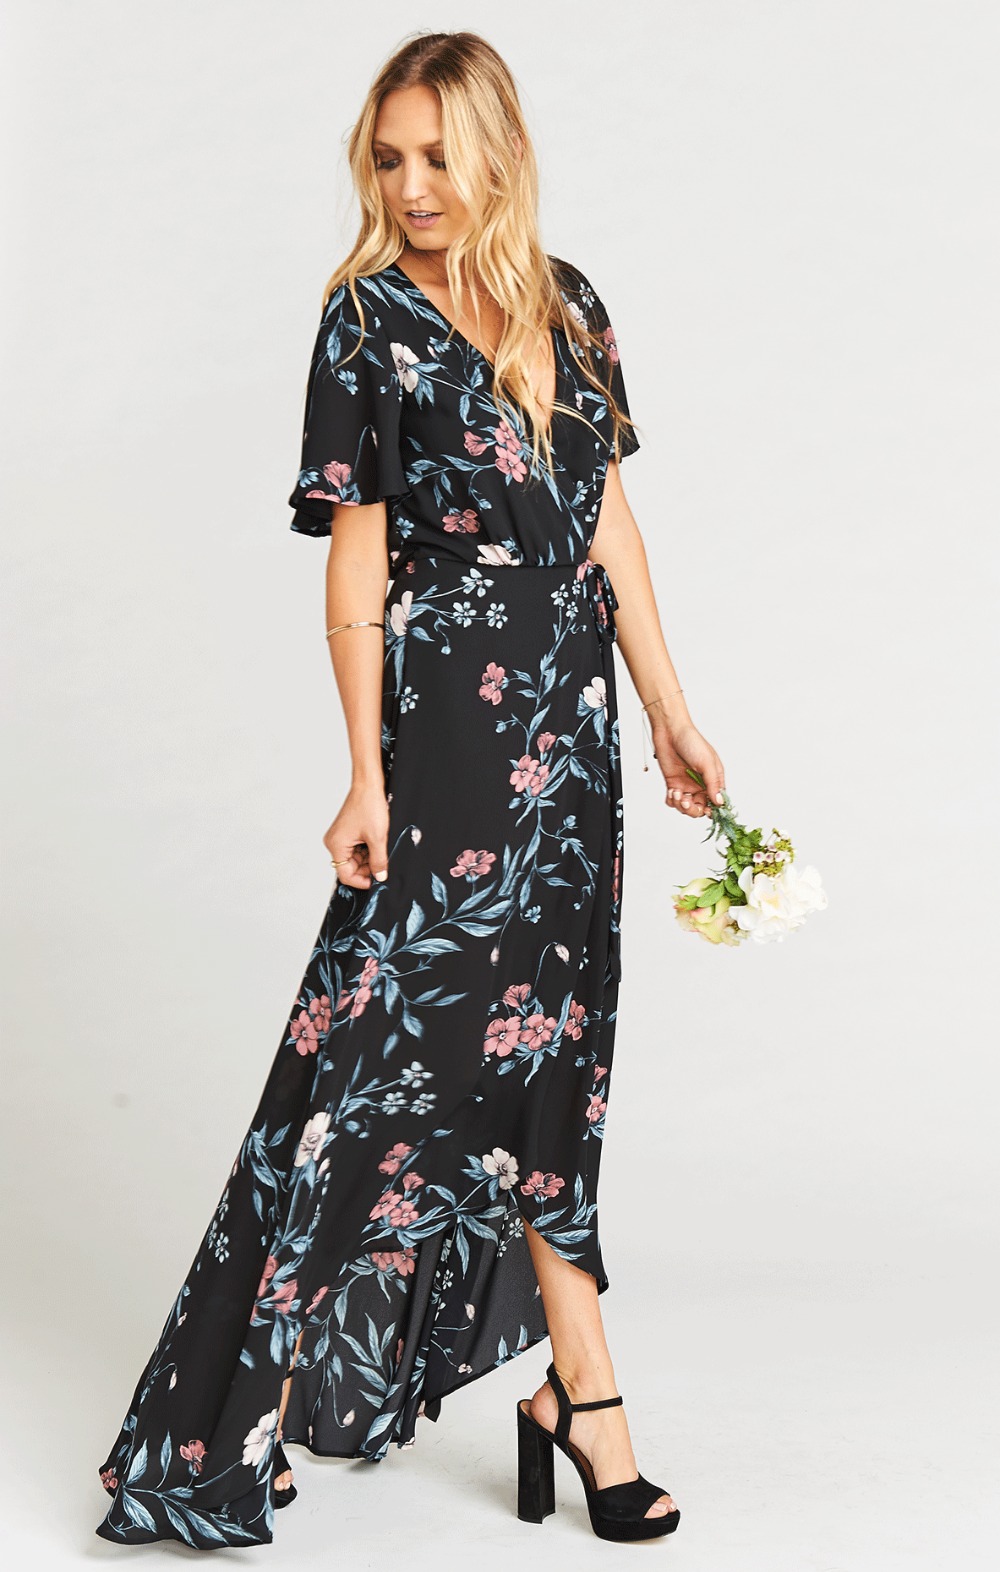 Winter Bridesmaids Collection From Show Me Your Mumu